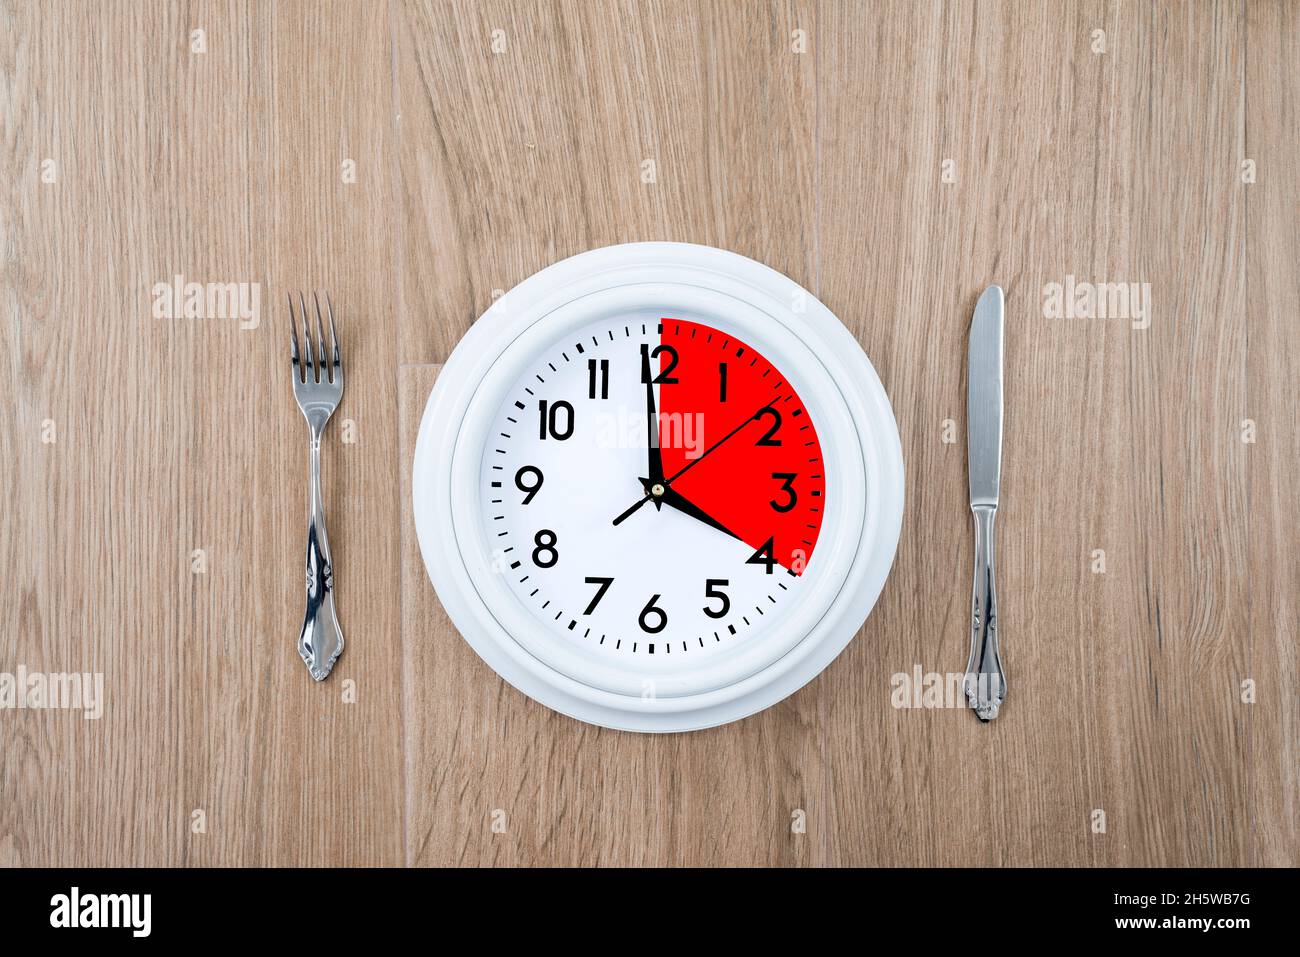 Clock with one portion marked in red. Concept of intermittent fasting, a diet that provides benefits such as the regenerative mechanism of autophagy. Stock Photo